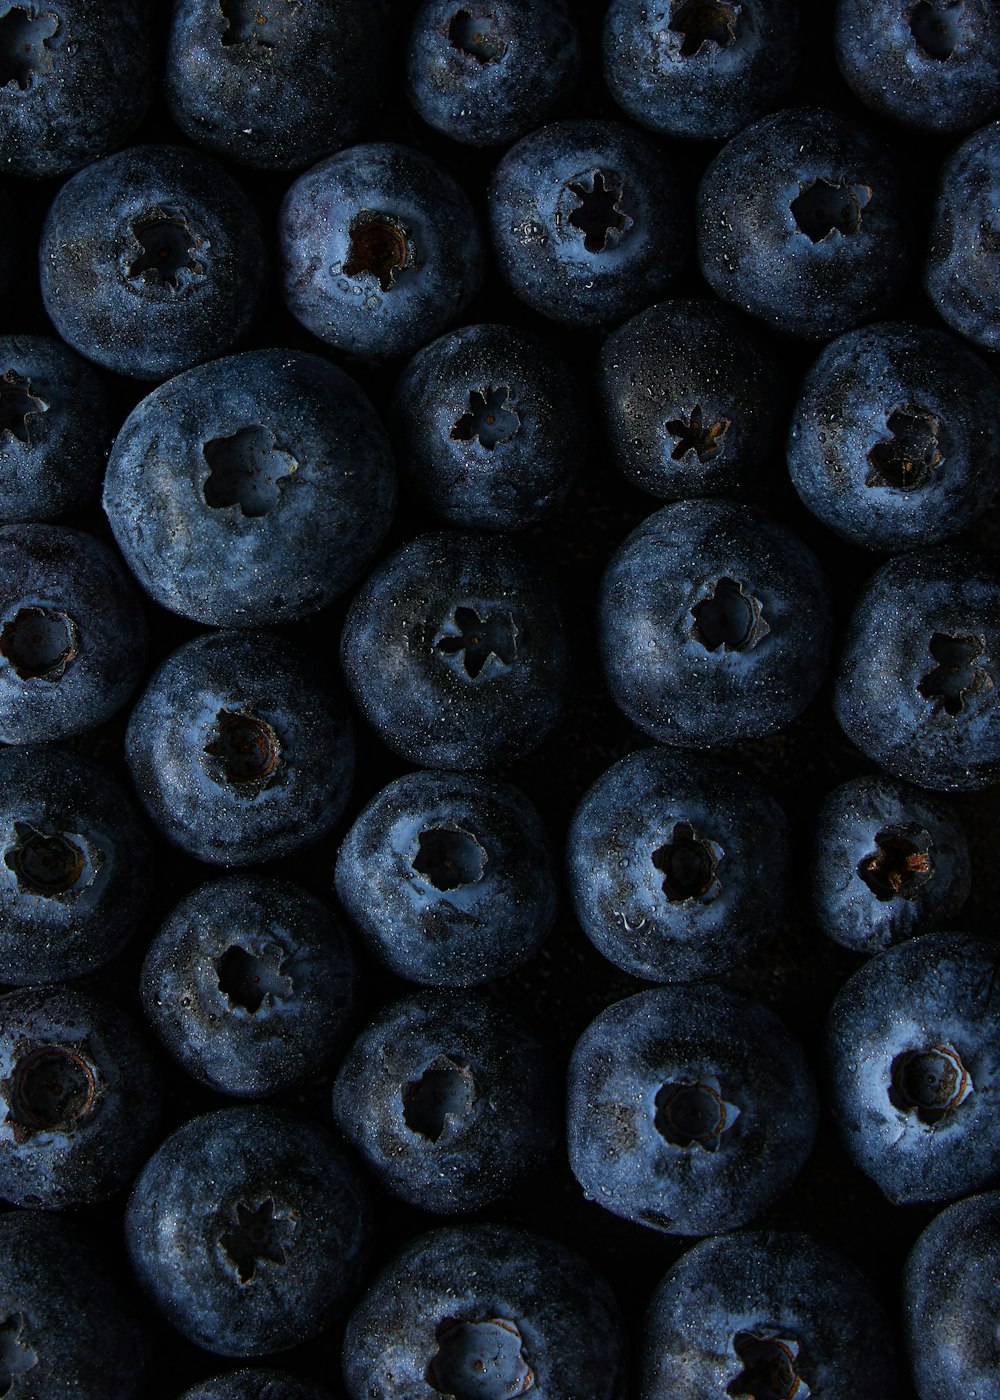 a close up of blueberries with holes in them